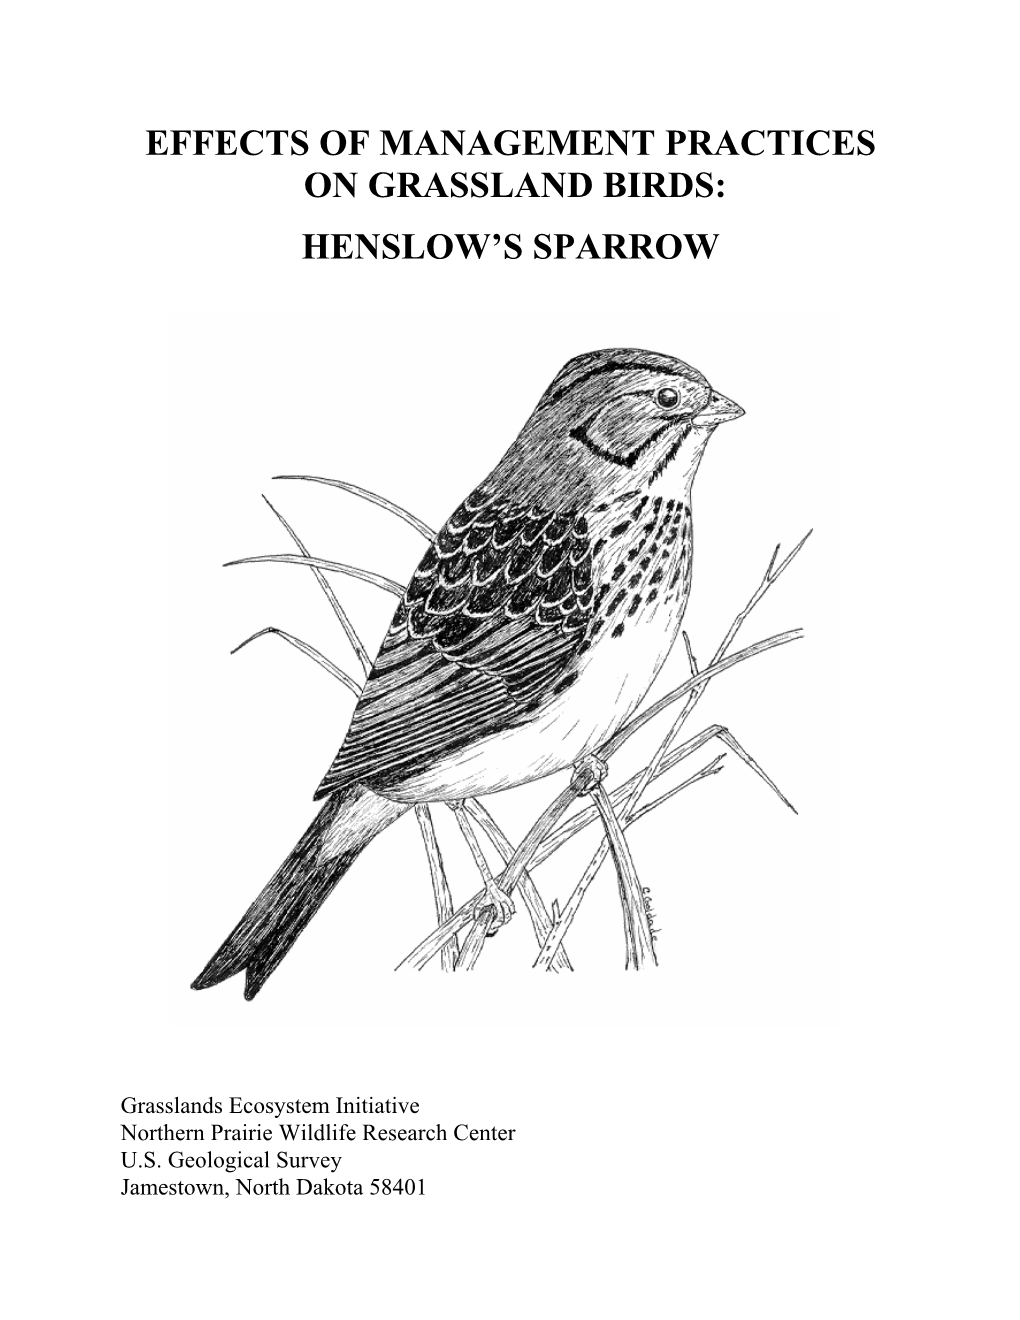 Henslow's Sparrow Habitat, Site Fidelity, and Reproduction in Missouri